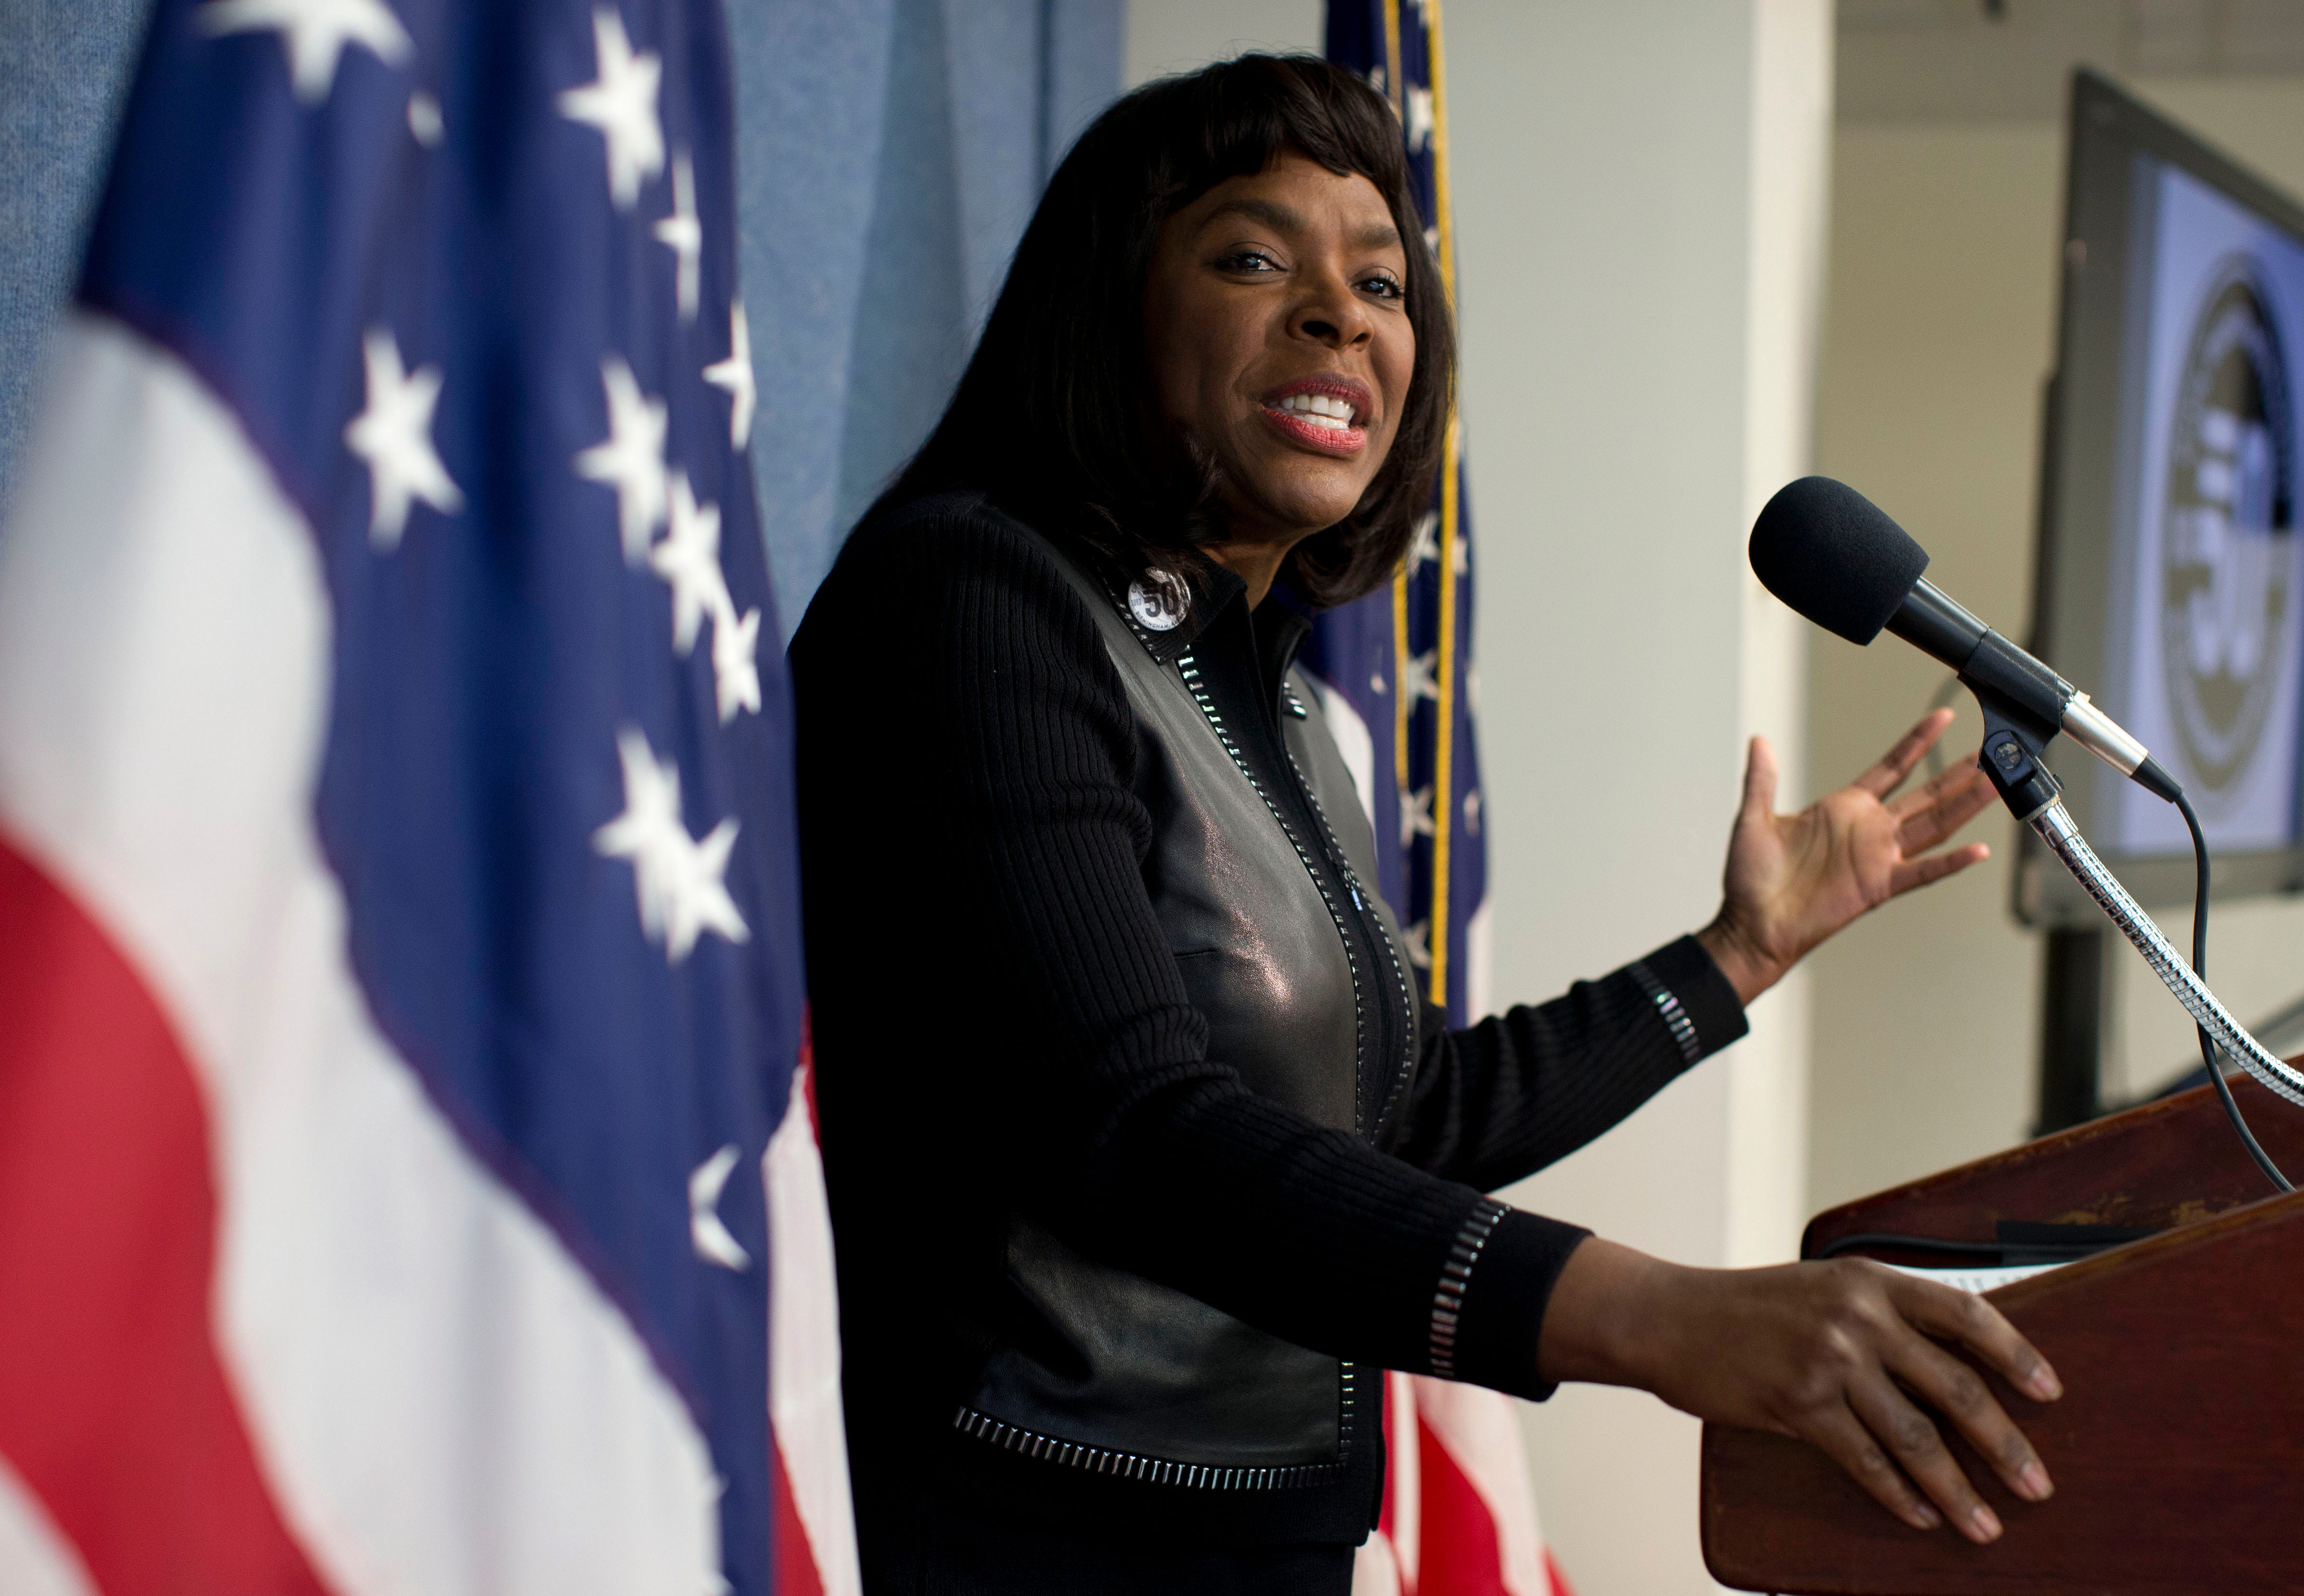 In this 2013 file photo, U.S. Rep. Terri Sewell, D-Ala., announces plans to request the Congressional Gold Medal for the four young girls killed in the 1963 bombing at the 16th Street Church in Birmingham, Alabama.